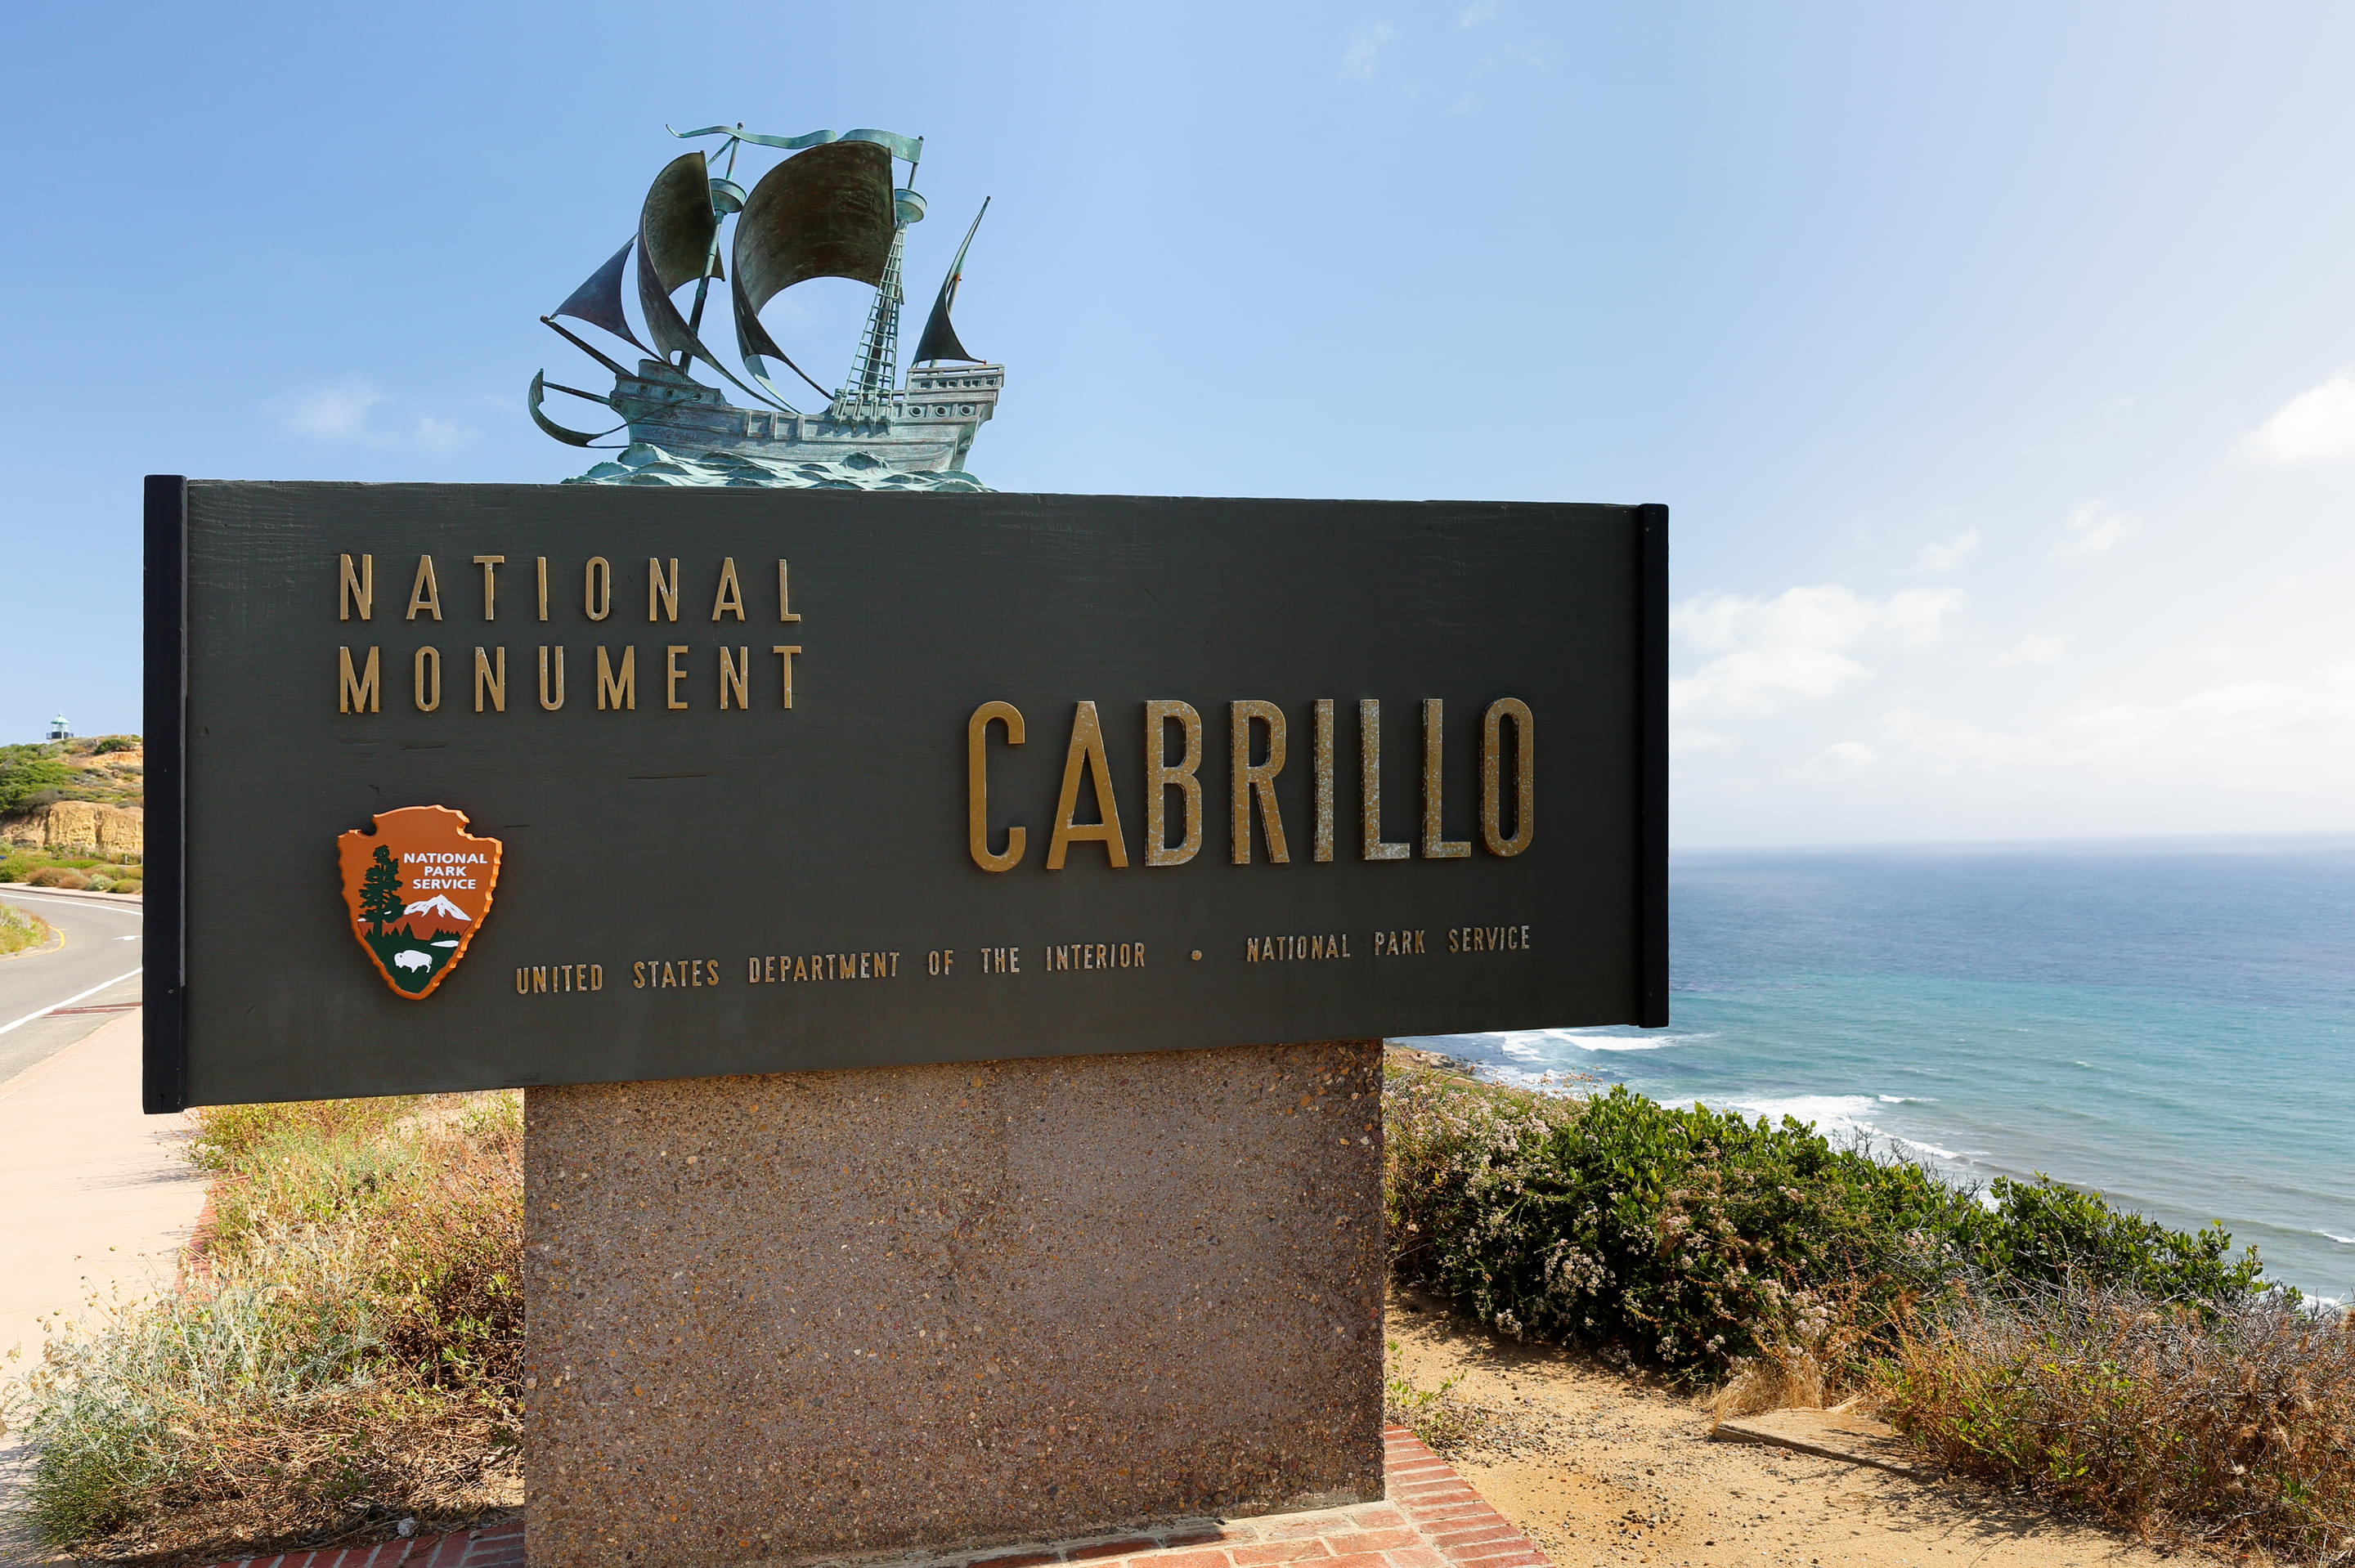 Cabrillo National Monument Overview